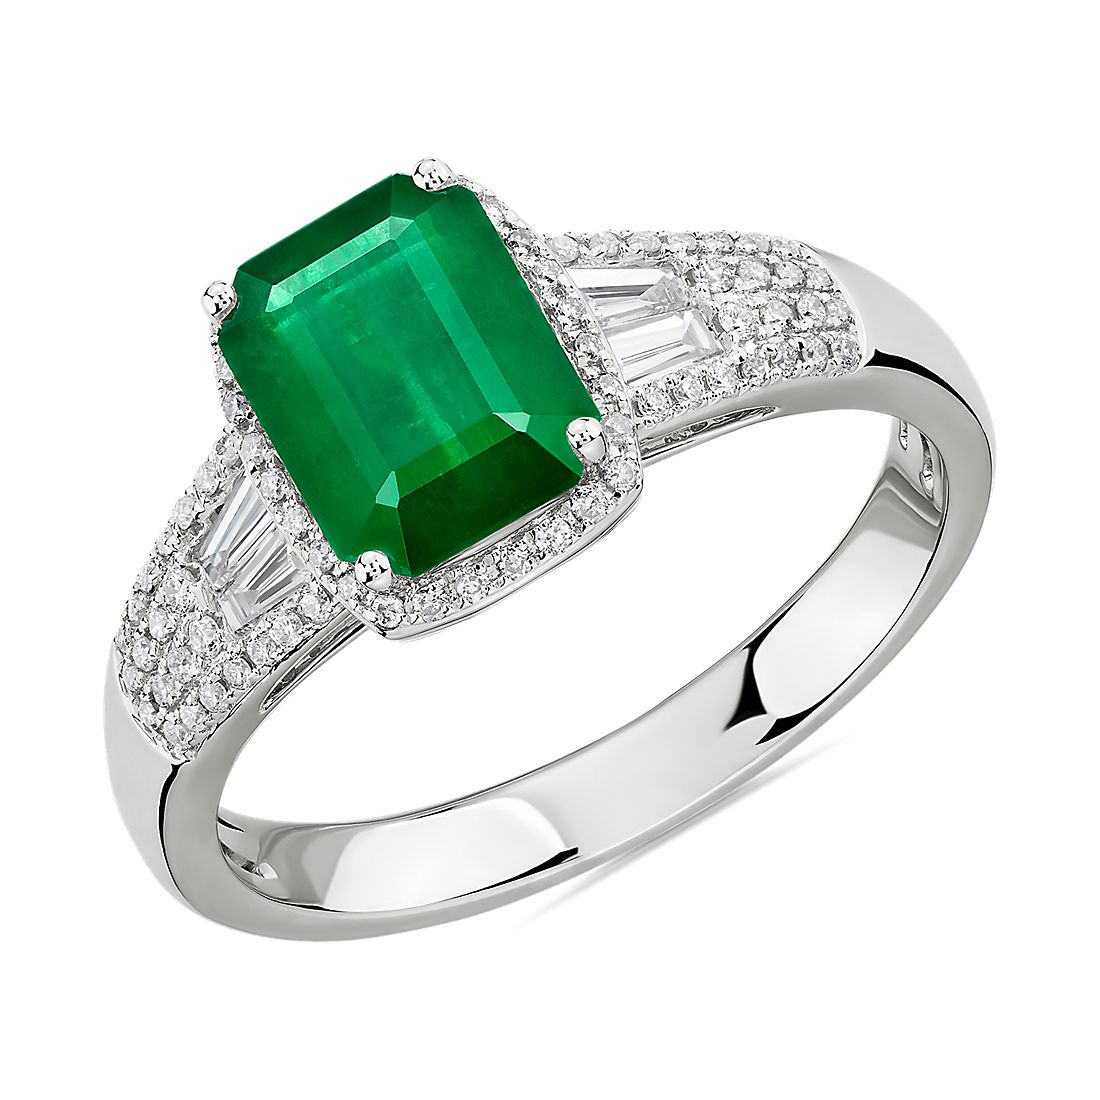 Emerald Cut Engagement Ring 2 CT Engagement Ring 14K White Gold Emerald Ring Green Emerald Engagement Ring Gemstone Ring May Birthstone Ring